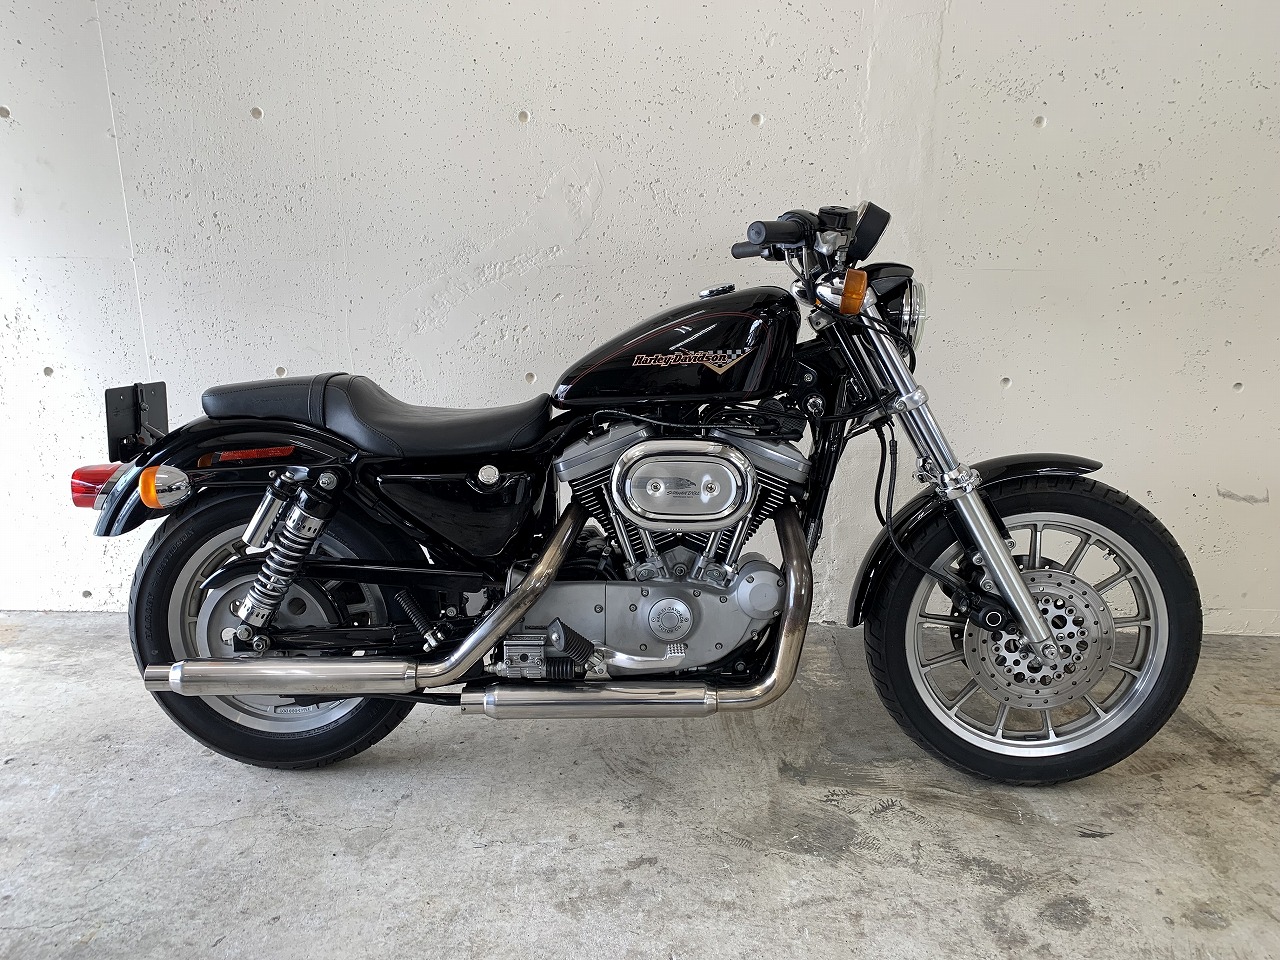 H-D XL1200S Sportster｜札幌のバイクショップ BROWN Motorcycle Co.